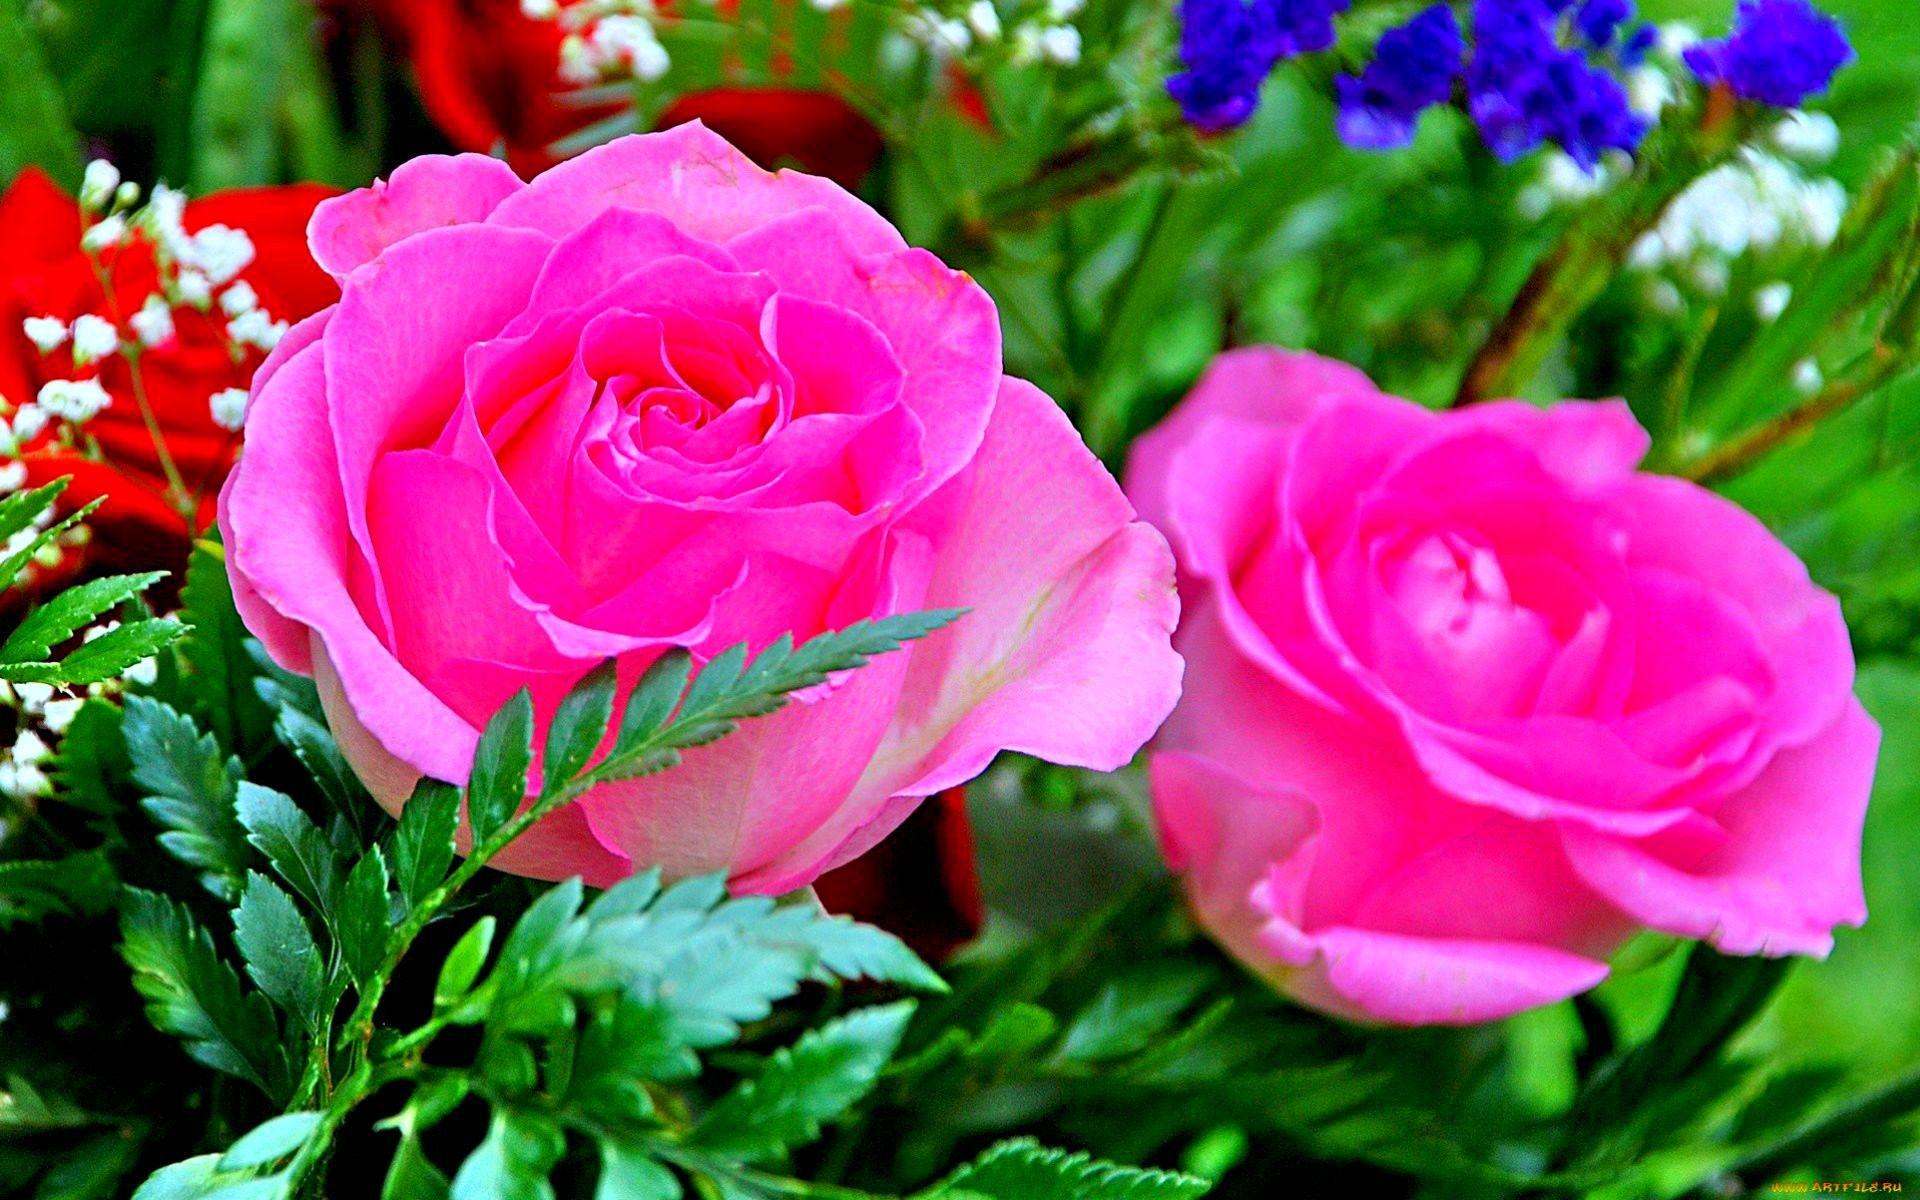 Rose Flower Images 3D Hd : 3d Hd Roses Wallpapers Top Free 3d Hd Roses